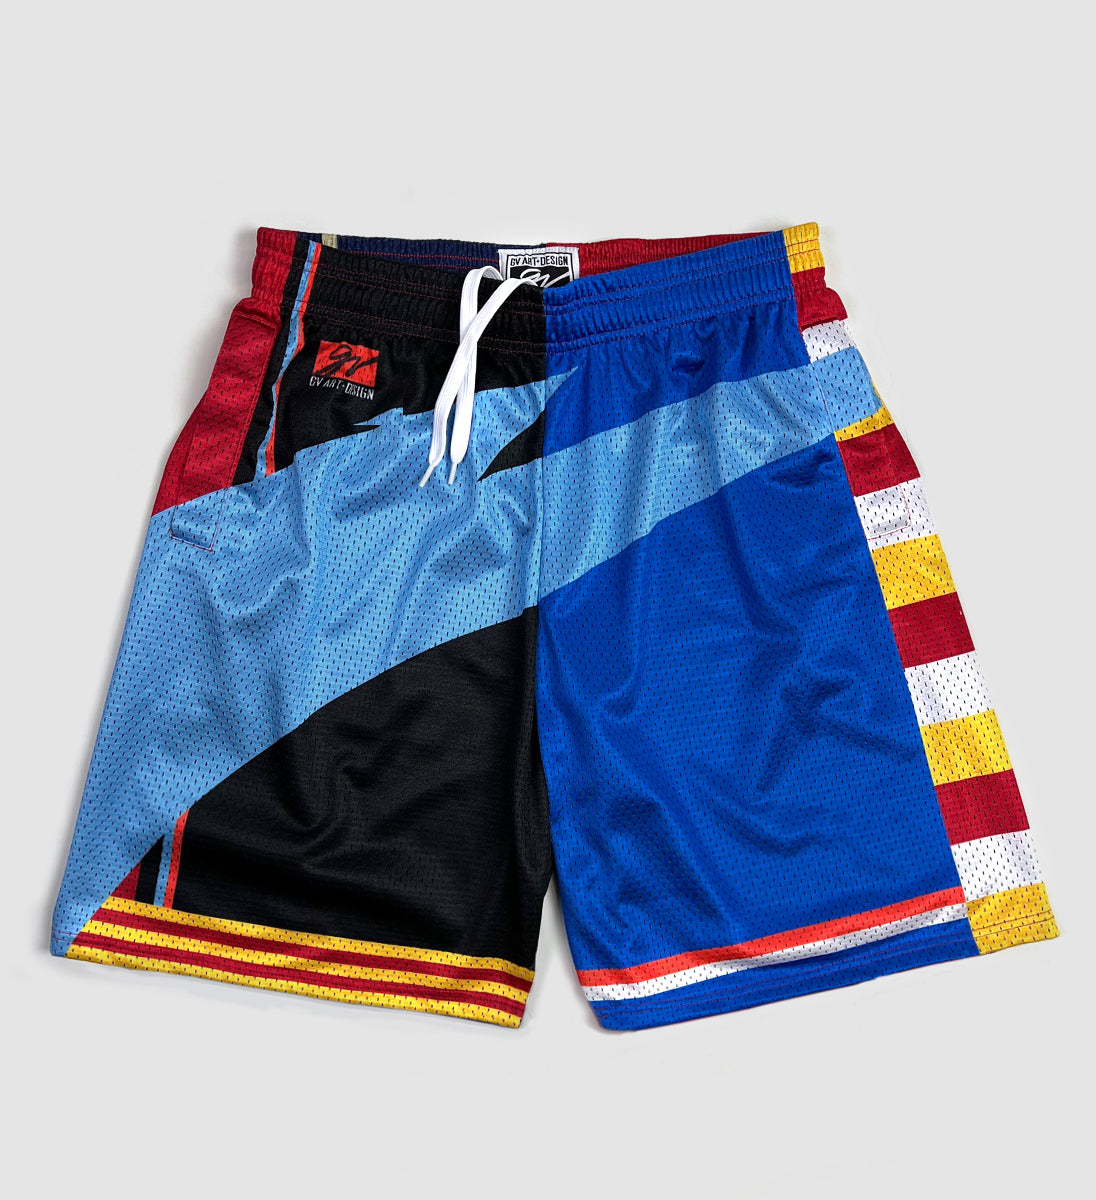 Cleveland Tradition Limited Edition Basketball Shorts